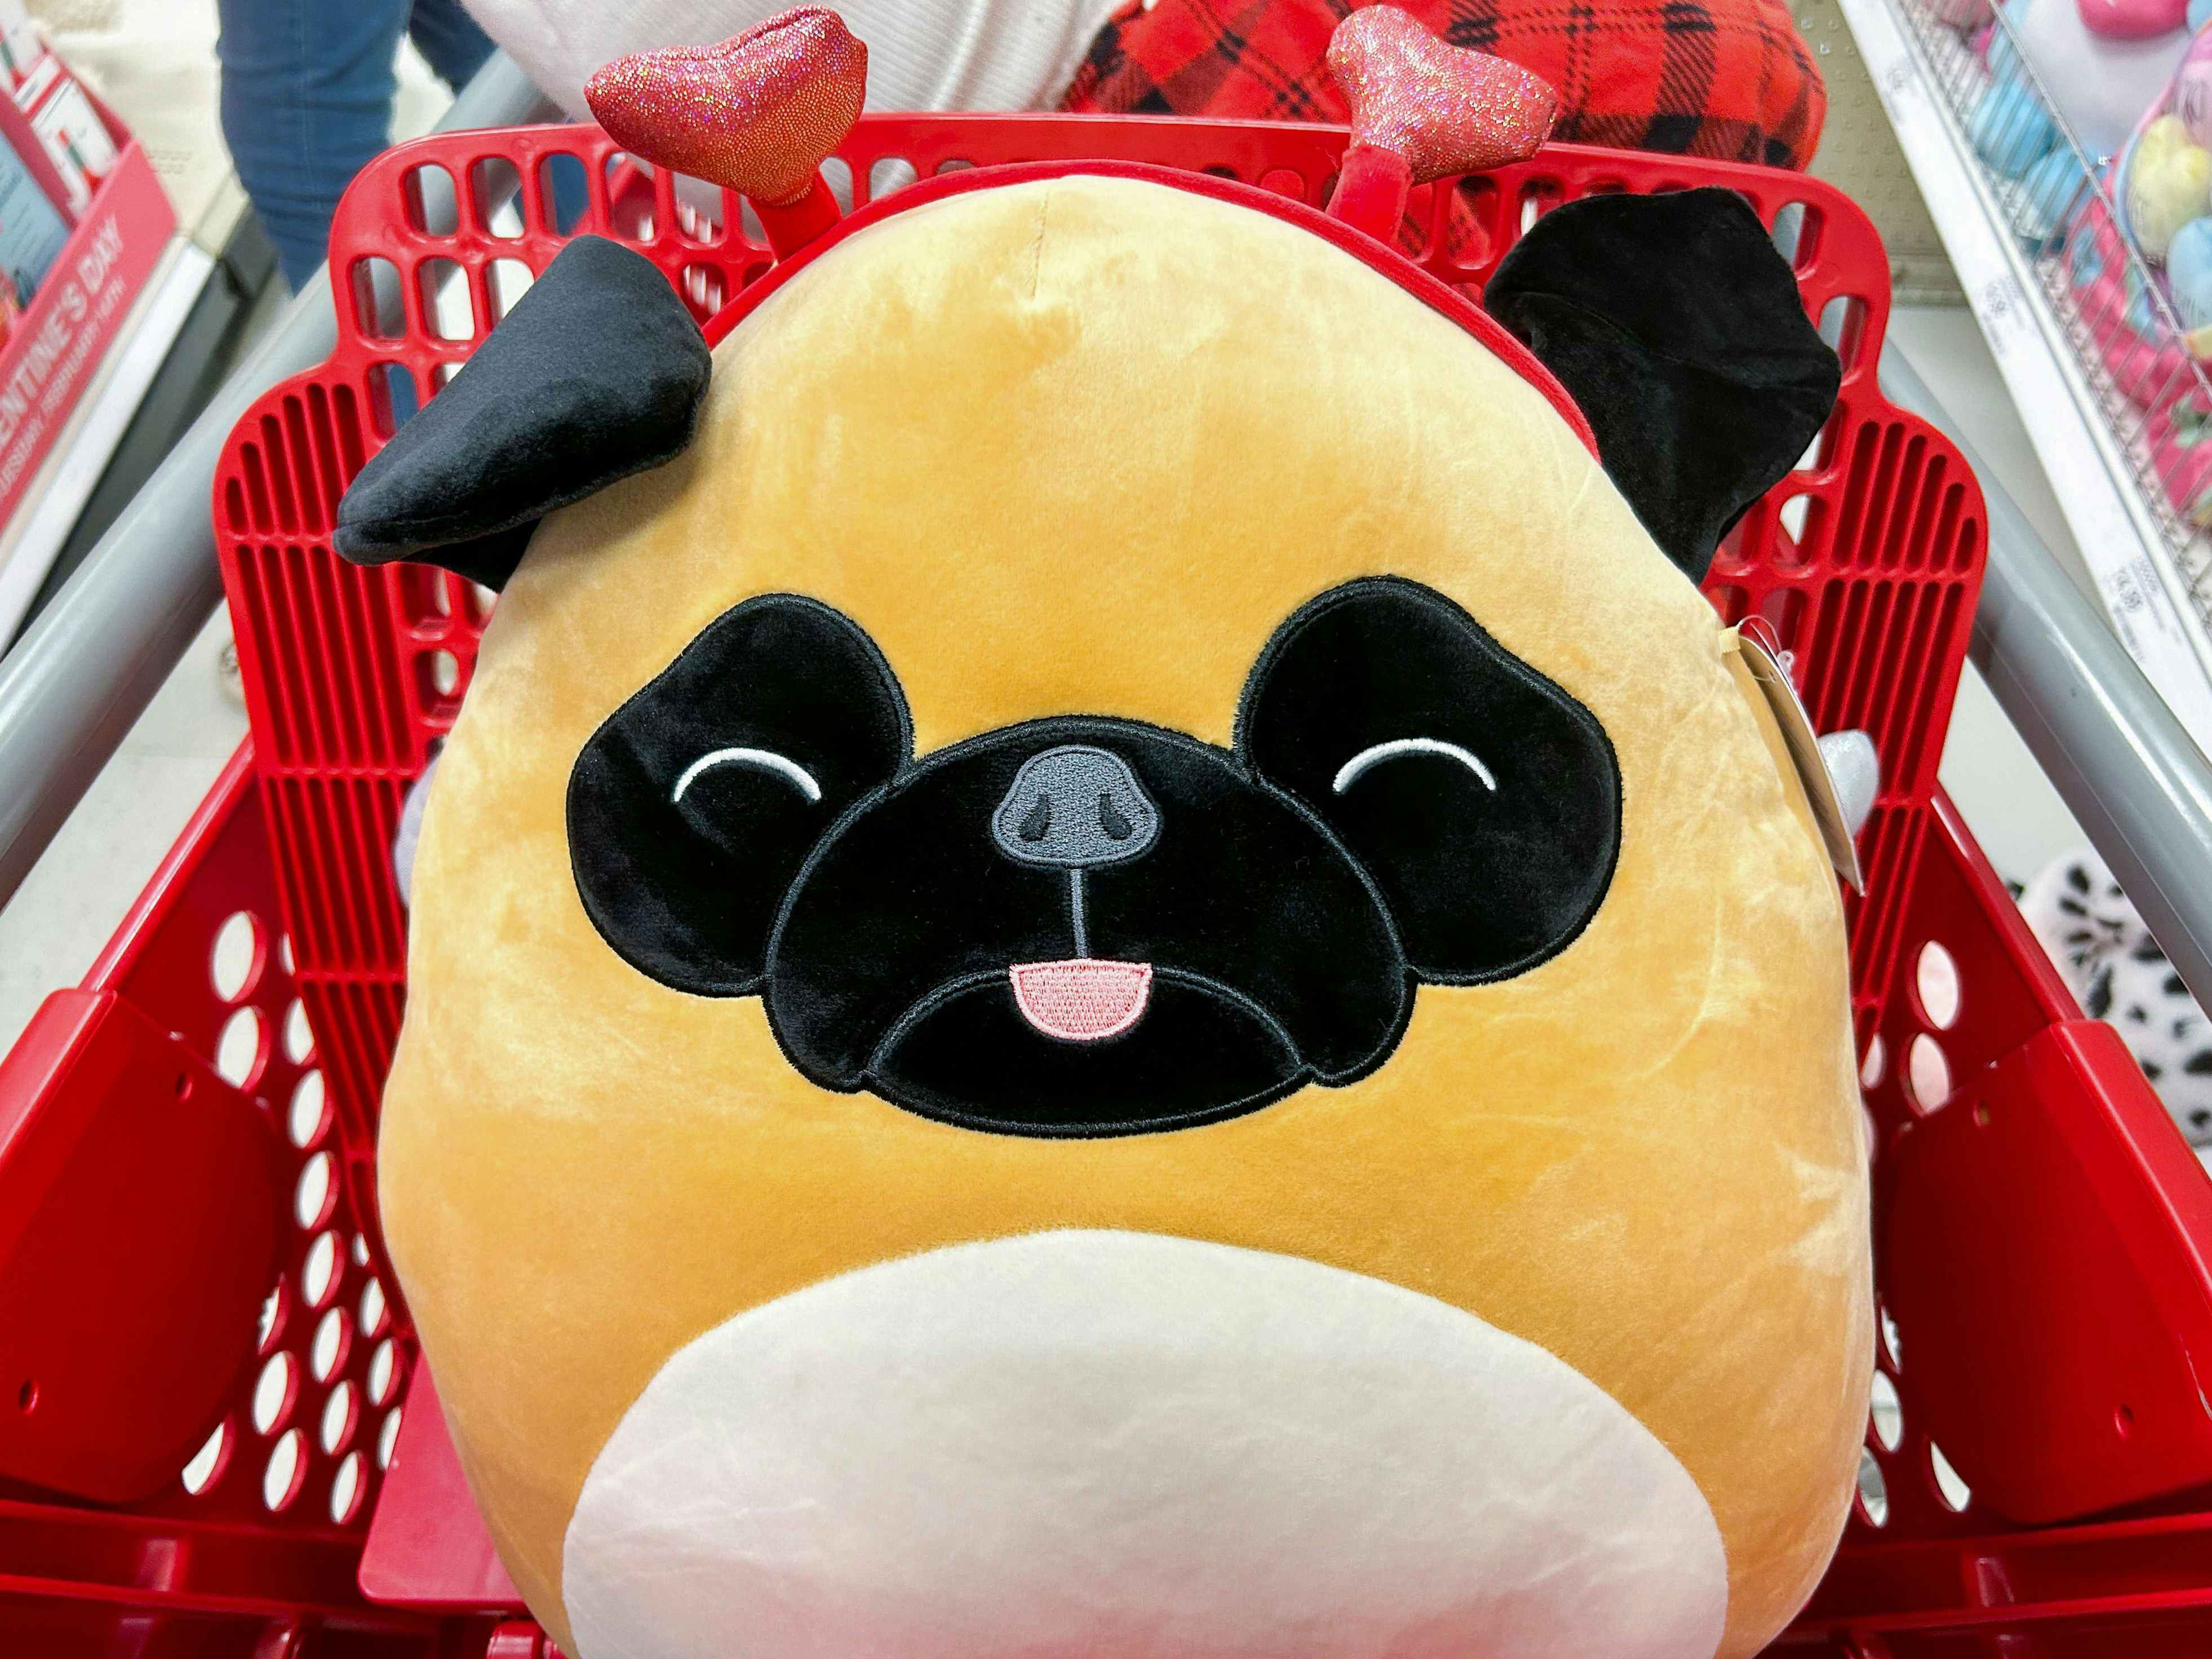 https://prod-cdn-thekrazycouponlady.imgix.net/wp-content/uploads/2023/01/target-valentines-day-squishmallows-pam-pug-08-1673028515-1673028515.jpg?auto=format&fit=fill&q=25